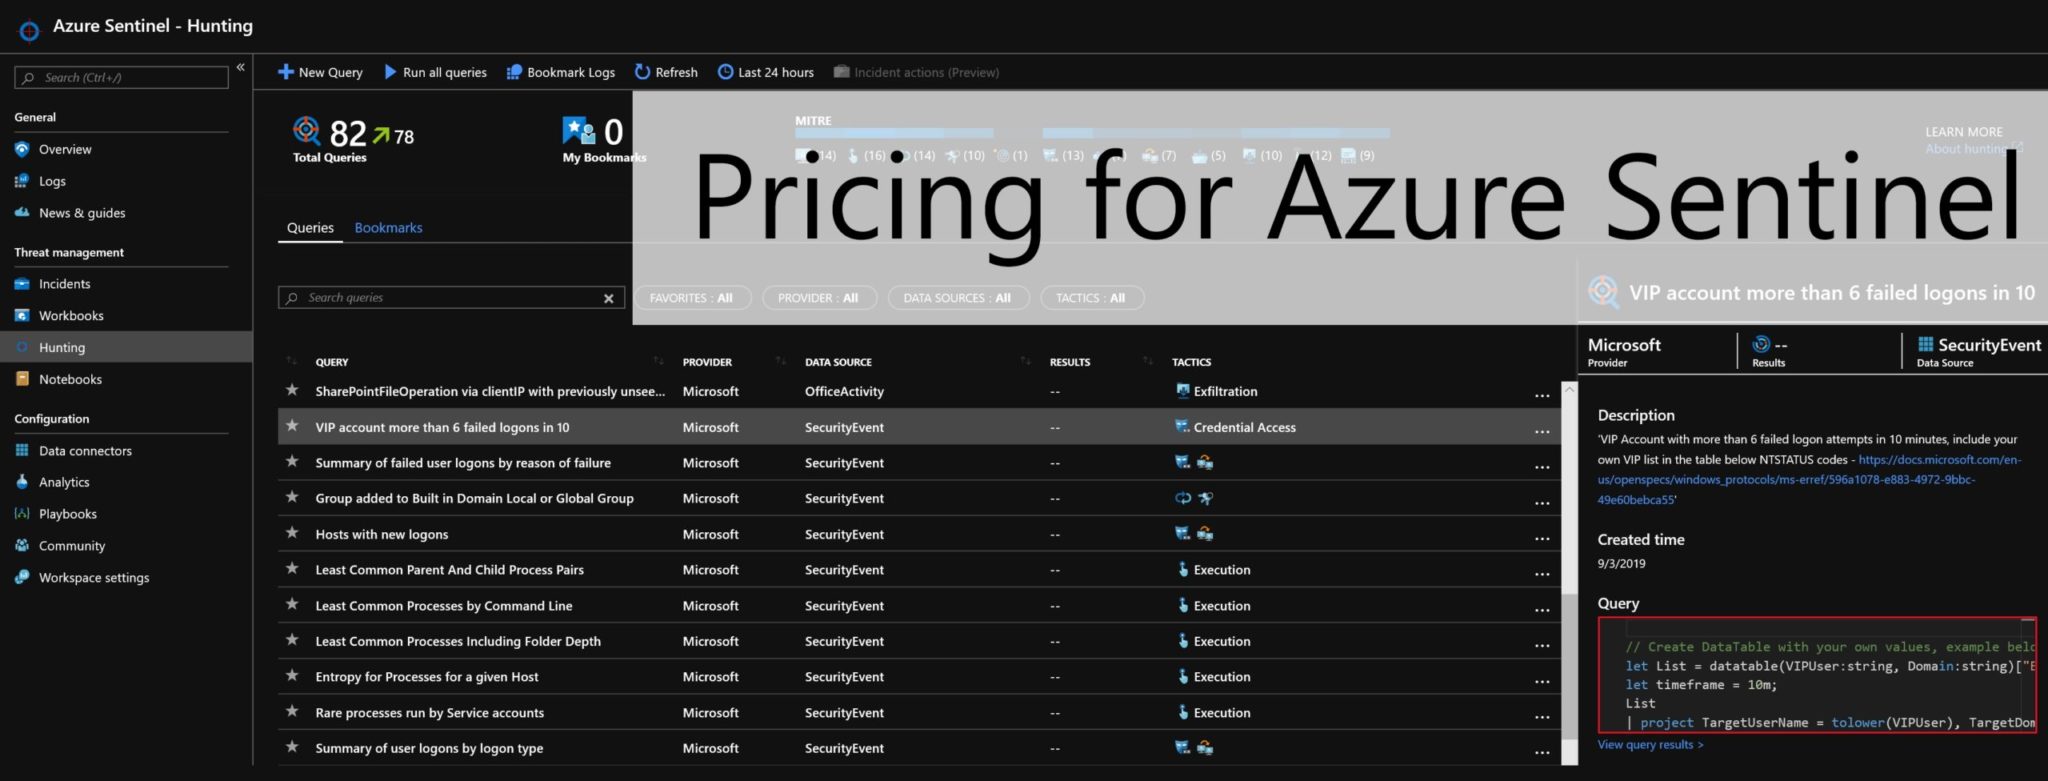 Pricing for Azure Sentinel is GA 14